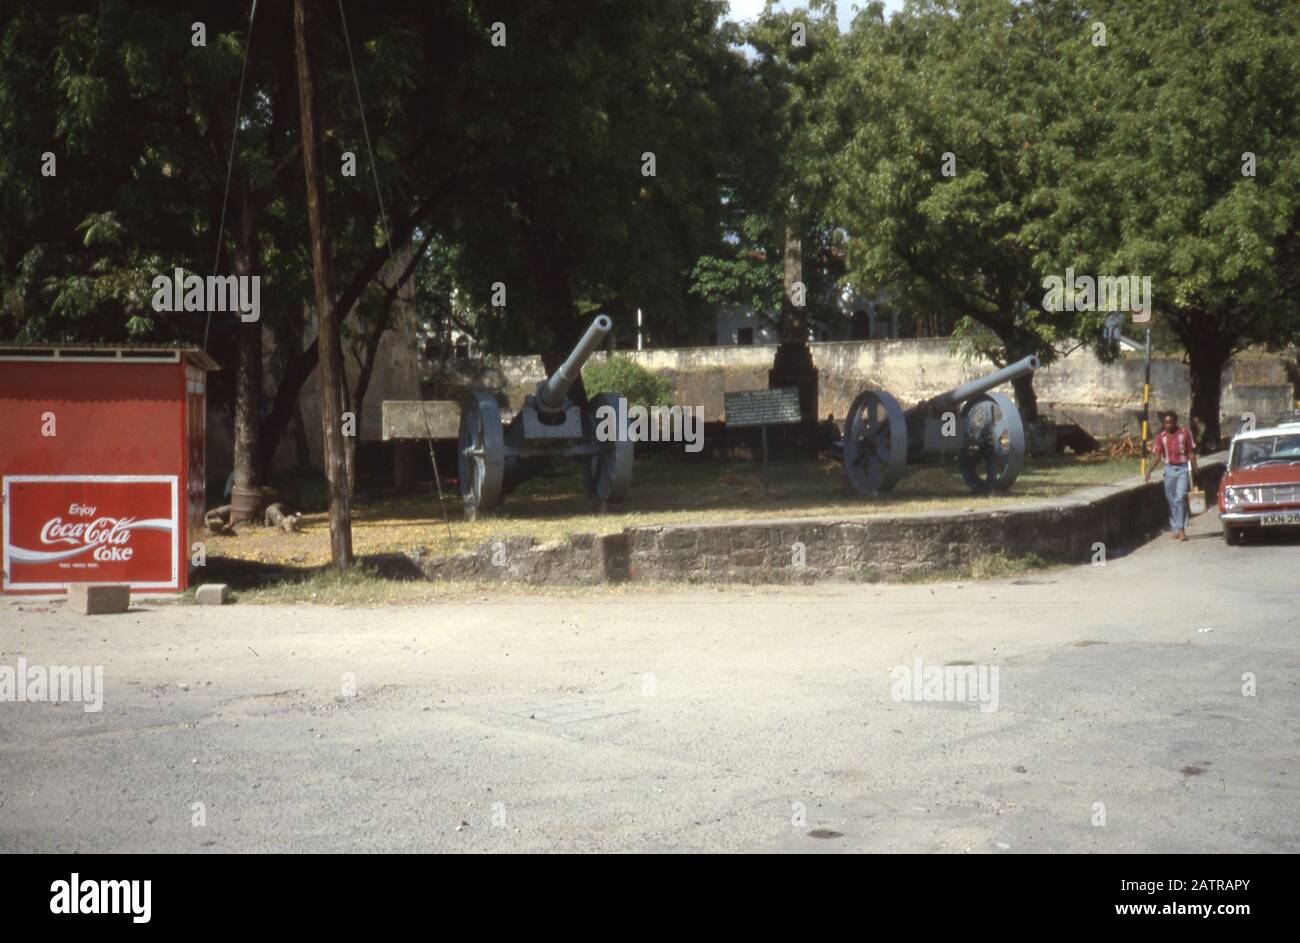 Vernacular photograph taken on a 35mm analog film transparency, believed to depict black car parked near green trees during daytime, 1987. Landmarks/locations detected include Coca-Cola. Major topics/objects detected include Tree, Vehicle, Road, Street and Gray Color. () Stock Photo